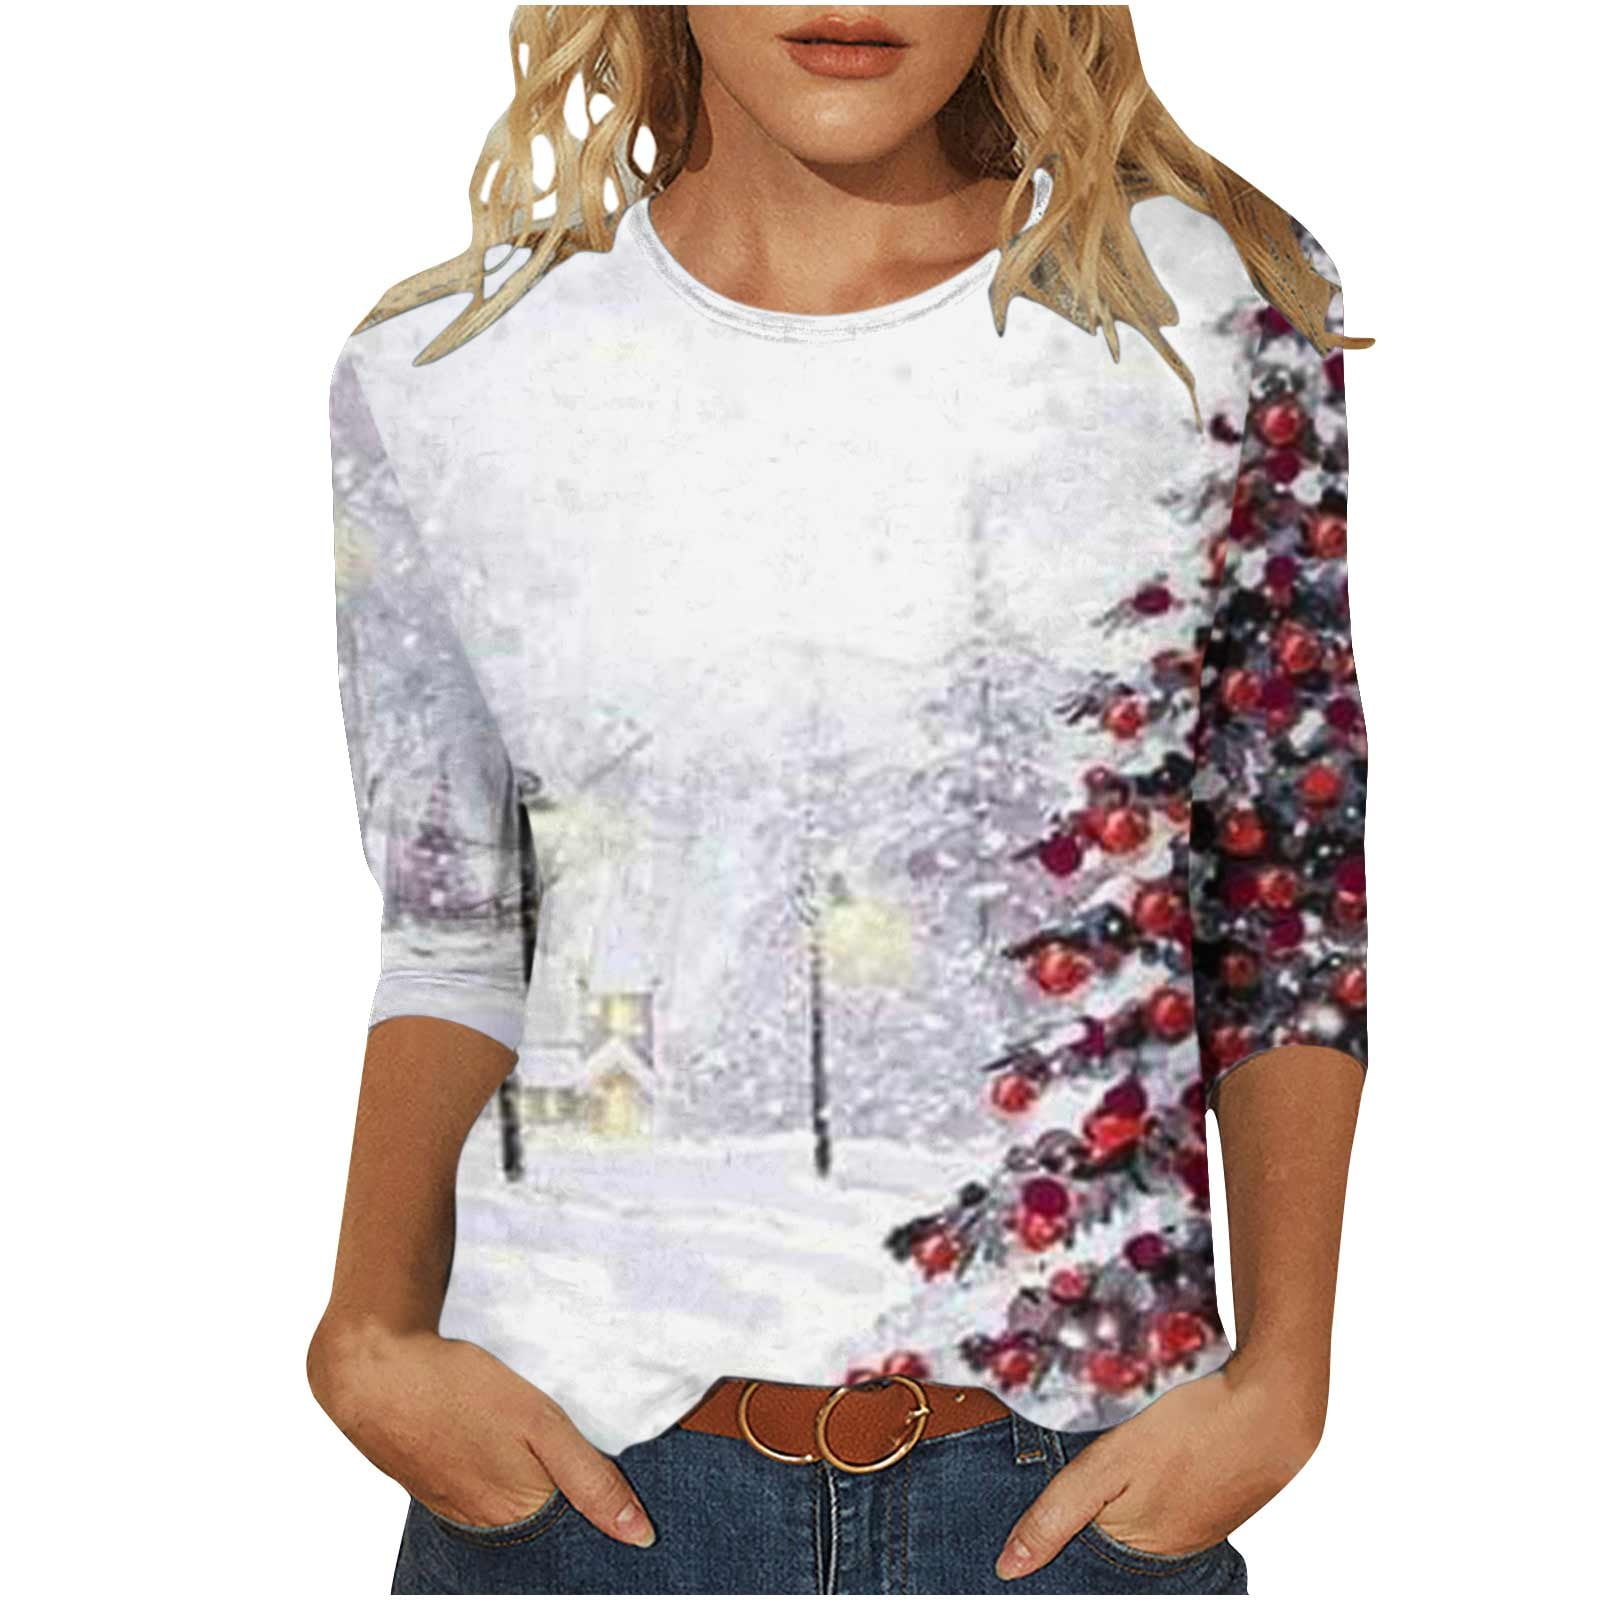 Elainilye Fashion Long Sleeve Shirts For Women Christmas Printed T-shirt  3/4 Sleeves Blouse Round Neck Casual Tops,Beige 